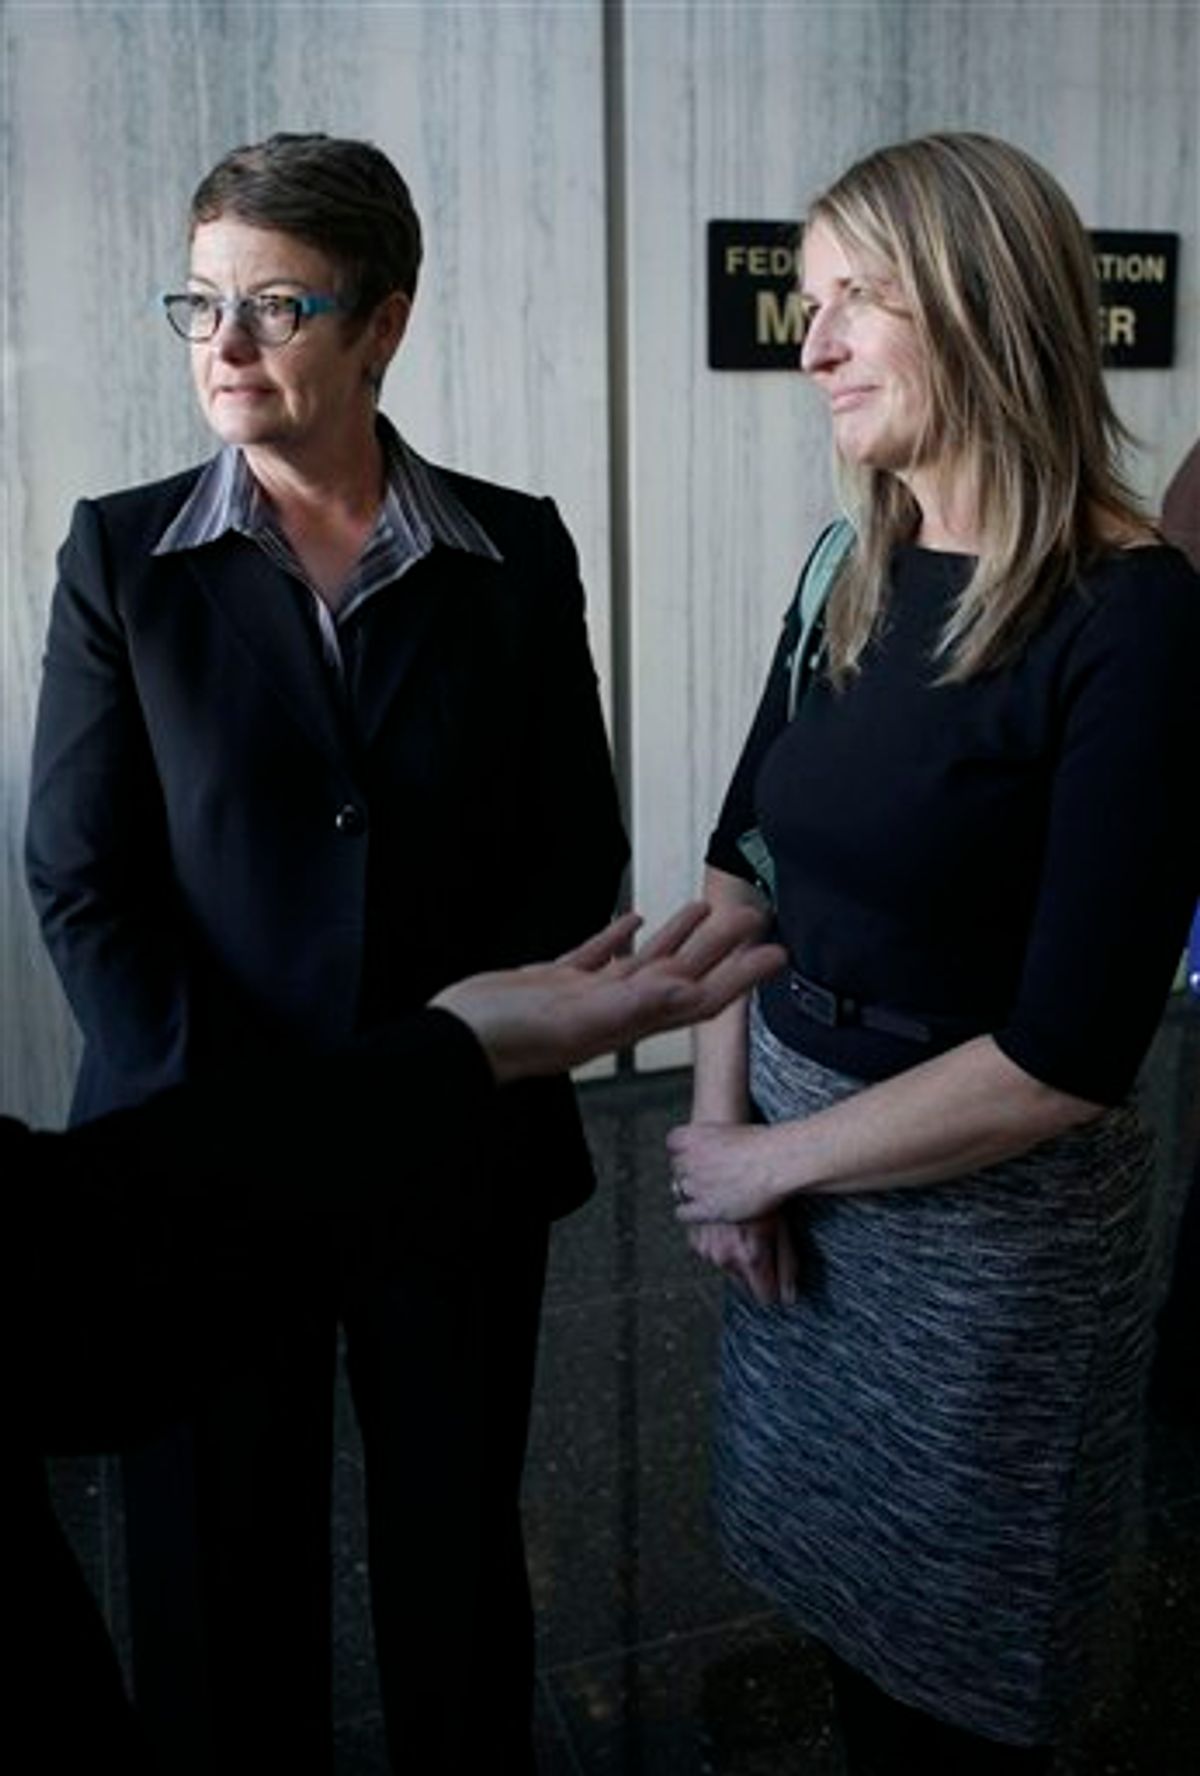 Kris Perry, left, speaks with reporters next to her partner Sandy Stier at the Phillip Burton Federal Building in San Francisco, Monday, June 13, 2011. A retired federal judge's long-term relationship with another man was the subject of an unusual and possibly unprecedented court hearing that began Monday involving California's same-sex marriage ban. Lawyers for the sponsors of the voter-approved ban asked the chief federal judge in San Francisco to vacate a decision issued by his predecessor last year that declared the same sex marriage ban an unconstitutional violation of gay Californians' civil rights. (AP Photo/Jeff Chiu) (AP)